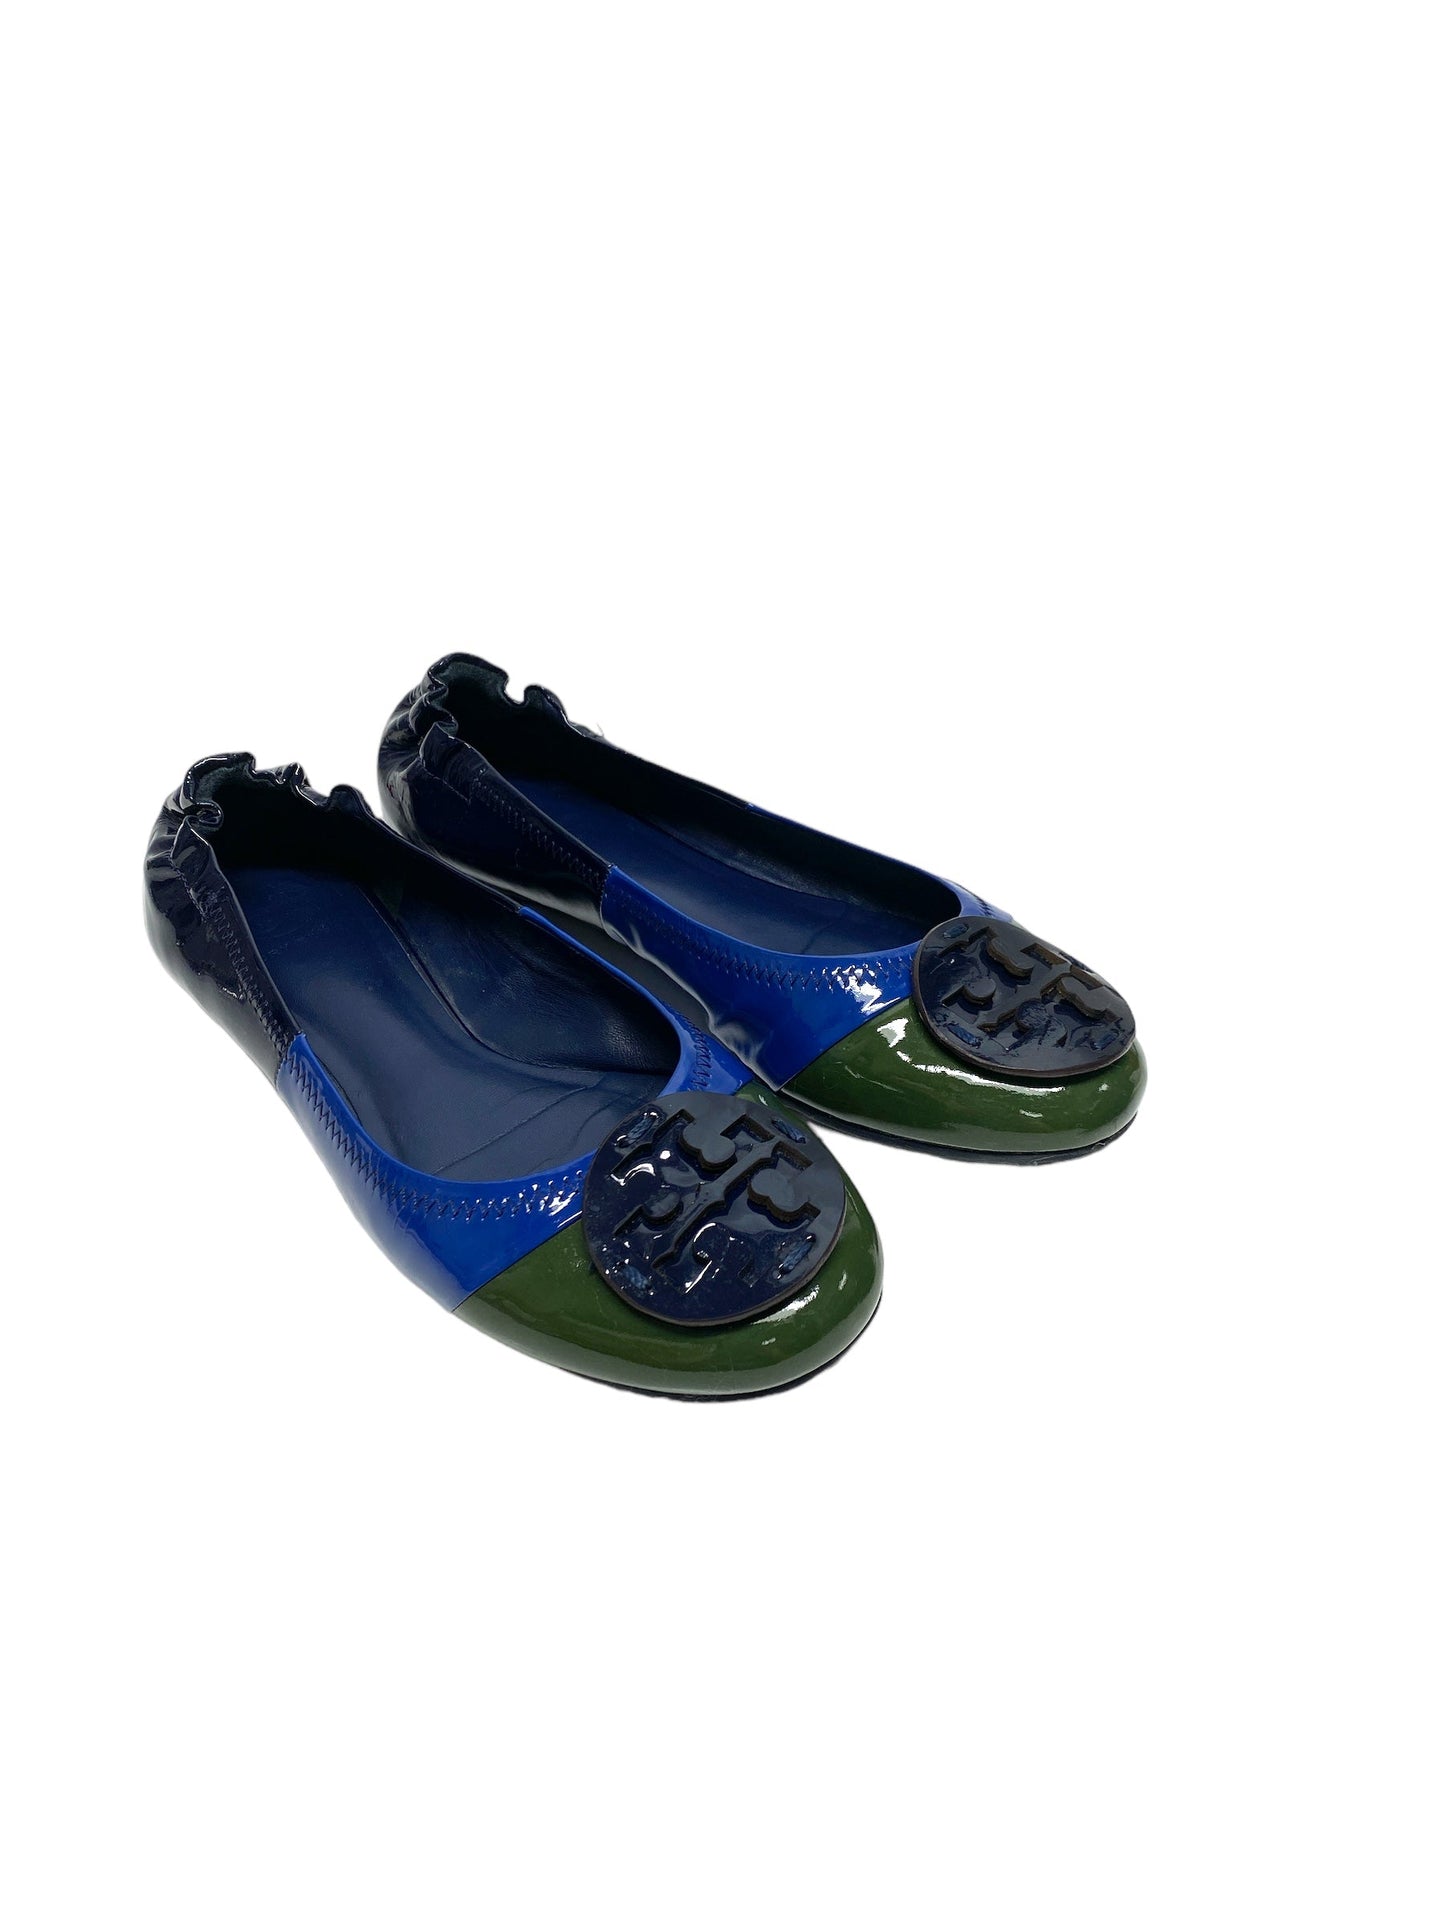 Blue & Green Shoes Designer Tory Burch, Size 8.5